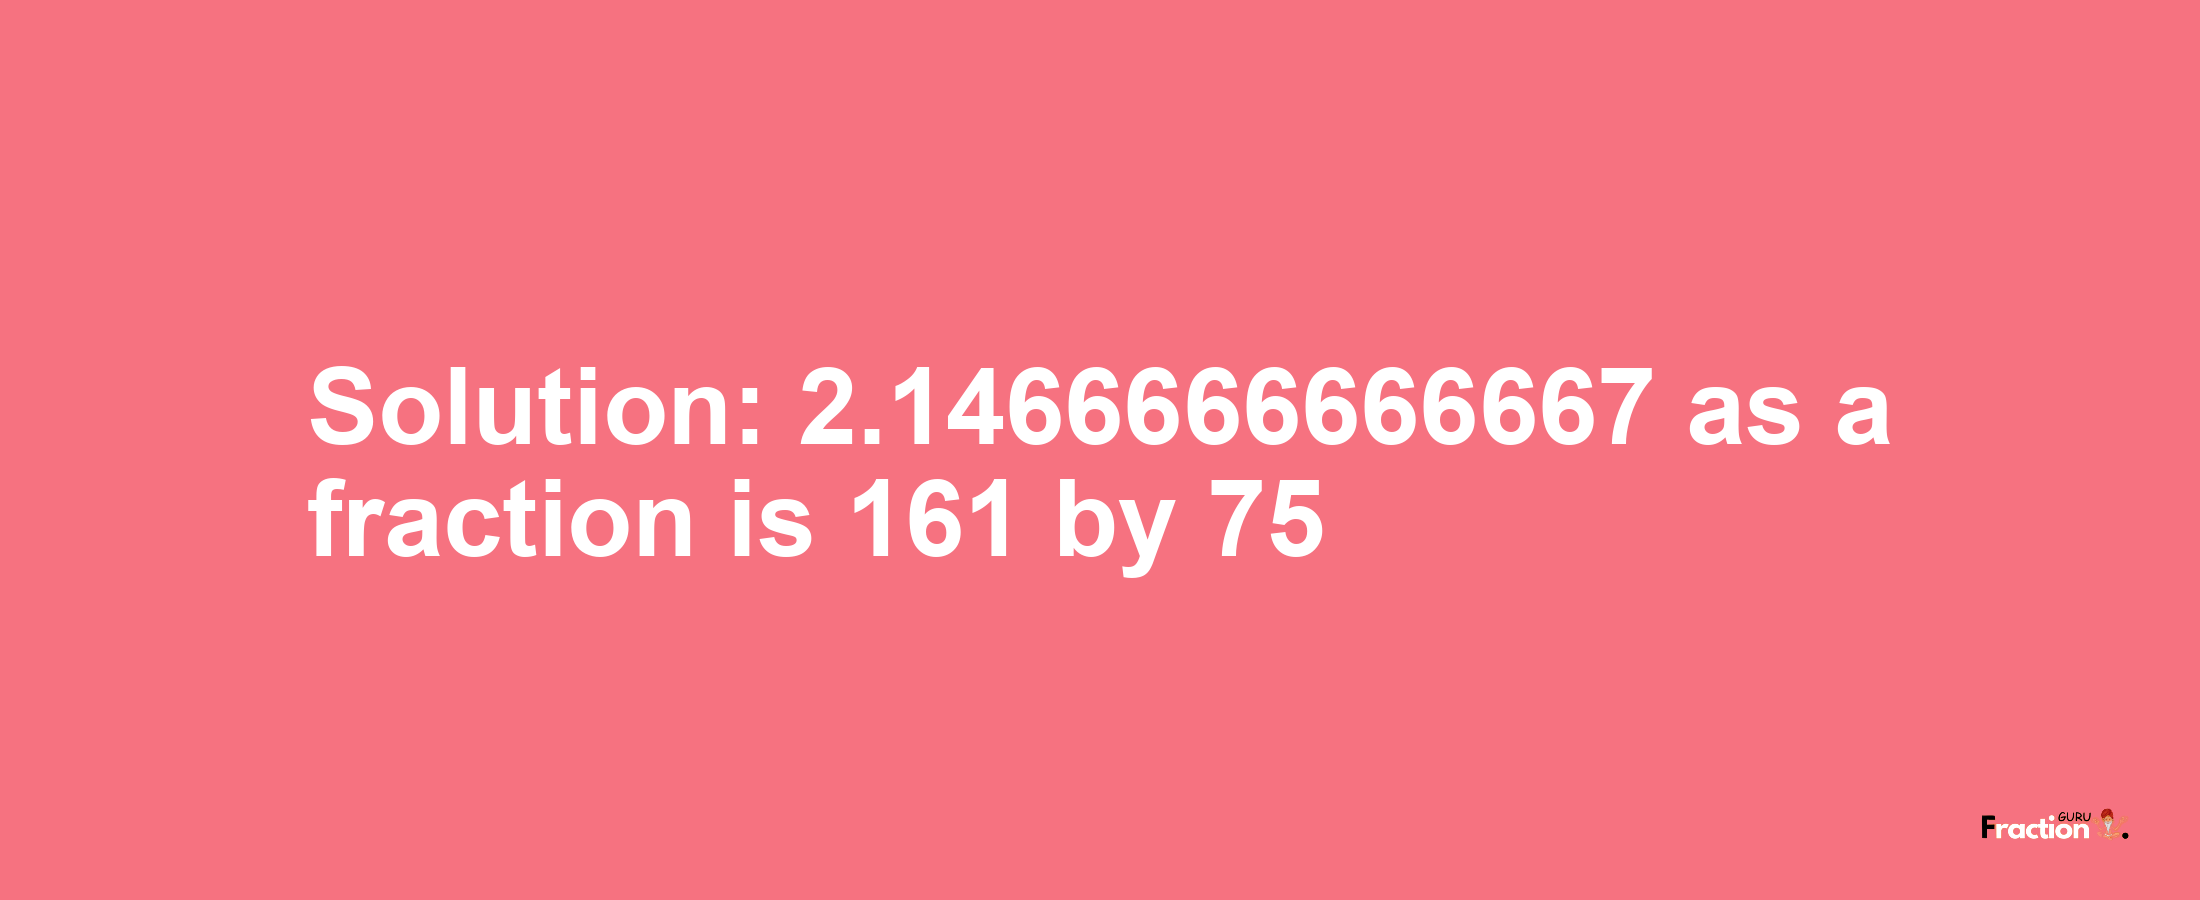 Solution:2.1466666666667 as a fraction is 161/75